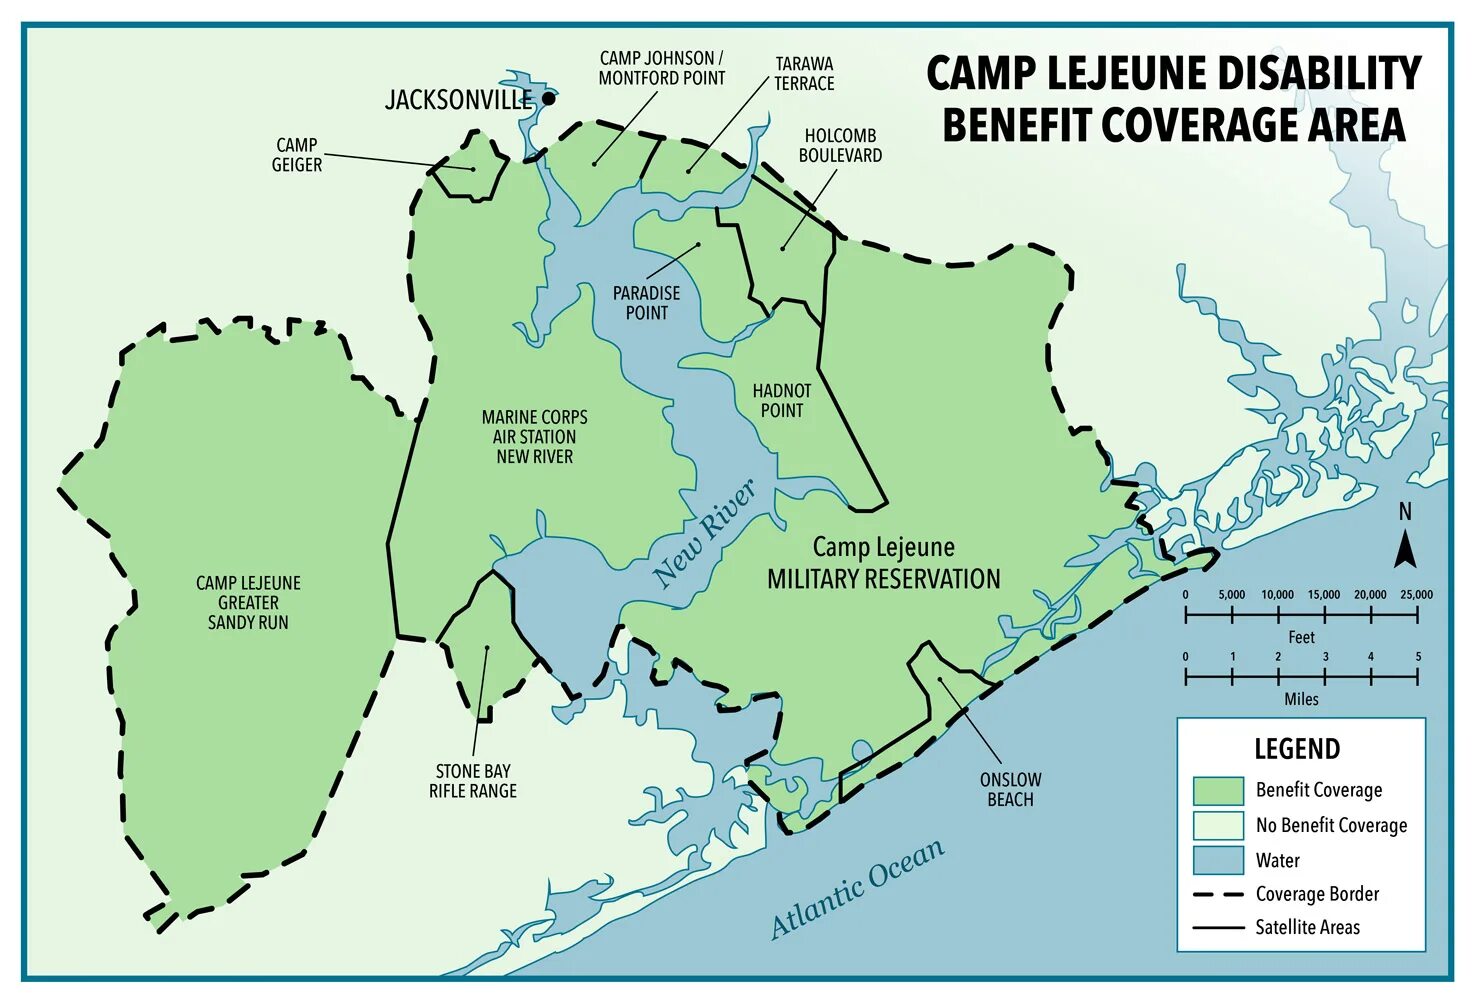 Camp Lejeune. Surrounded карта. Camp Lejeune Water lawsuit. Кэмп-Лежен Base photo. Surrounding area